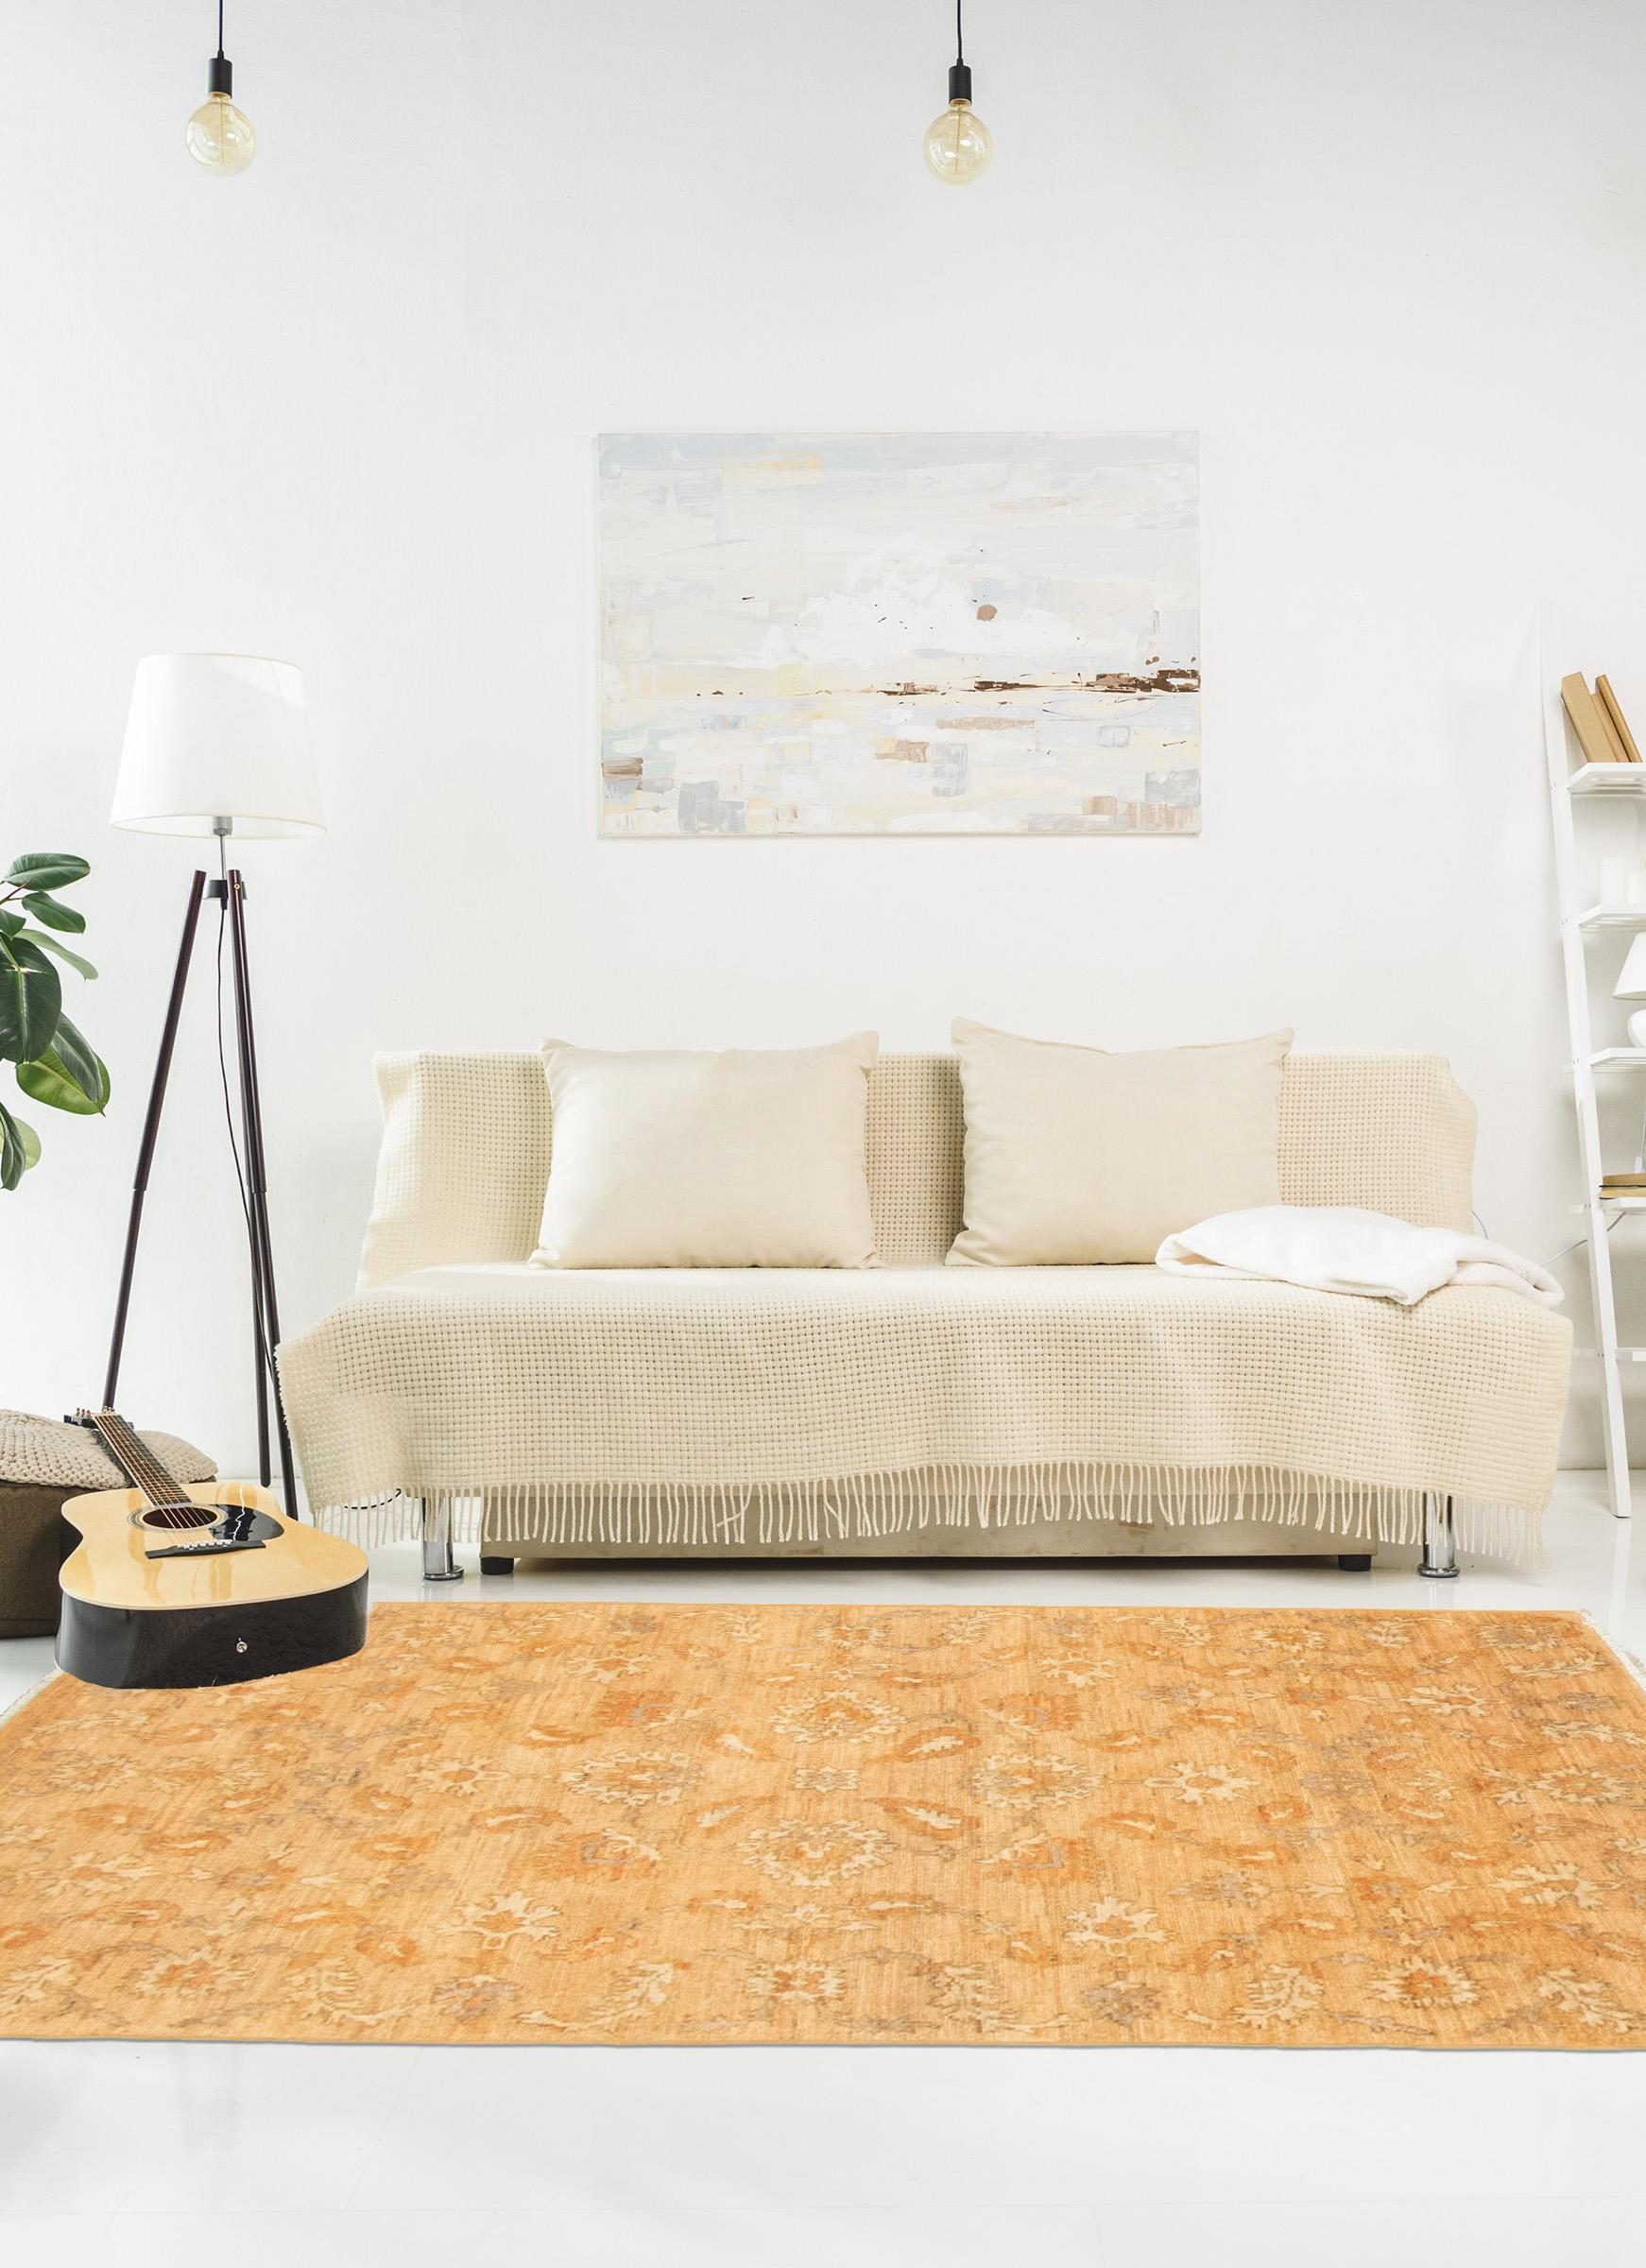 Detailed by bright and inviting shades of soft tan, orange, and cream blonde wool, this hand-knotted carpet measures 4'1